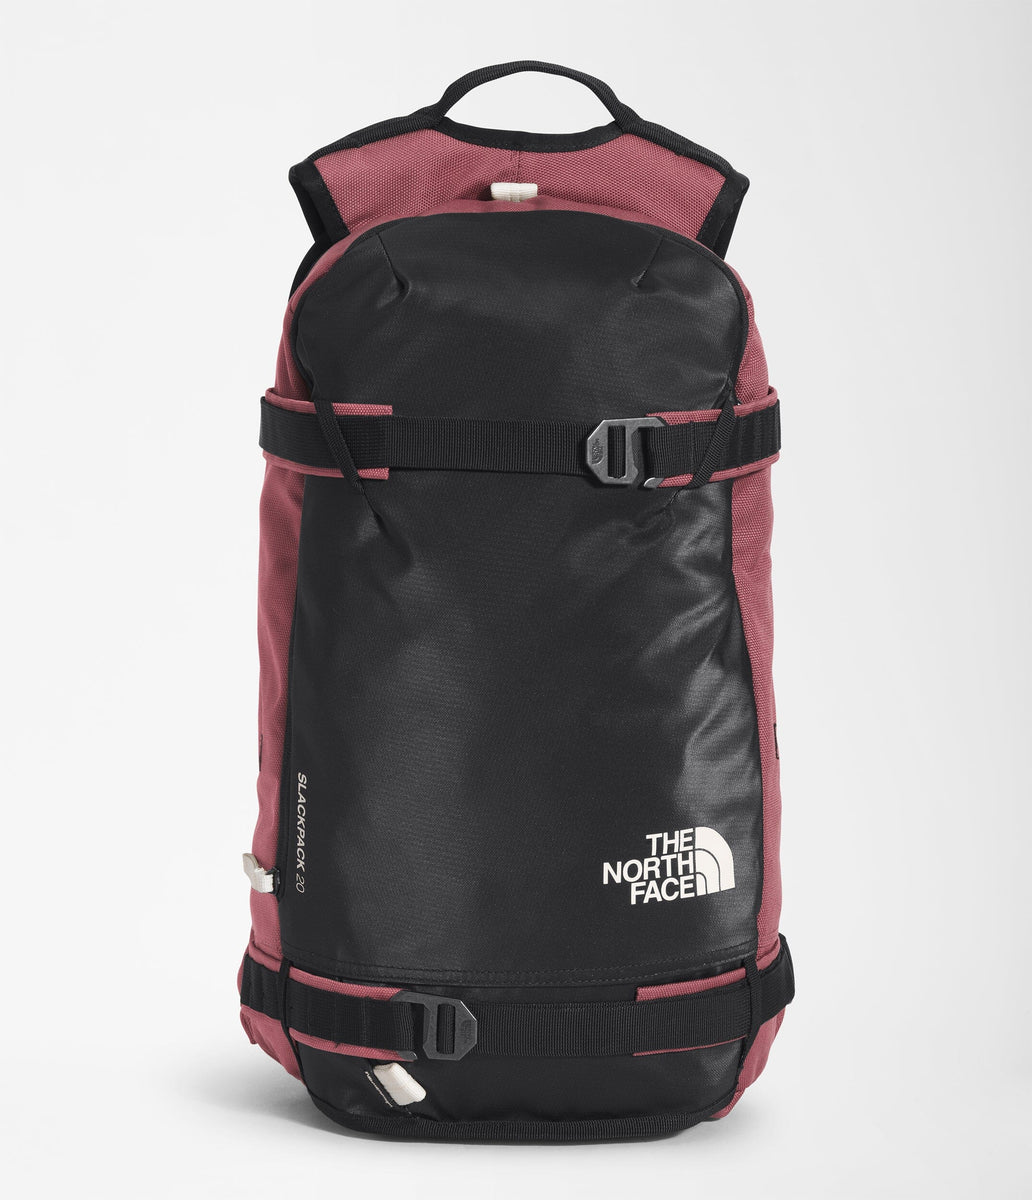 THE NORTH FACE WOMENS SLACKPACK 20